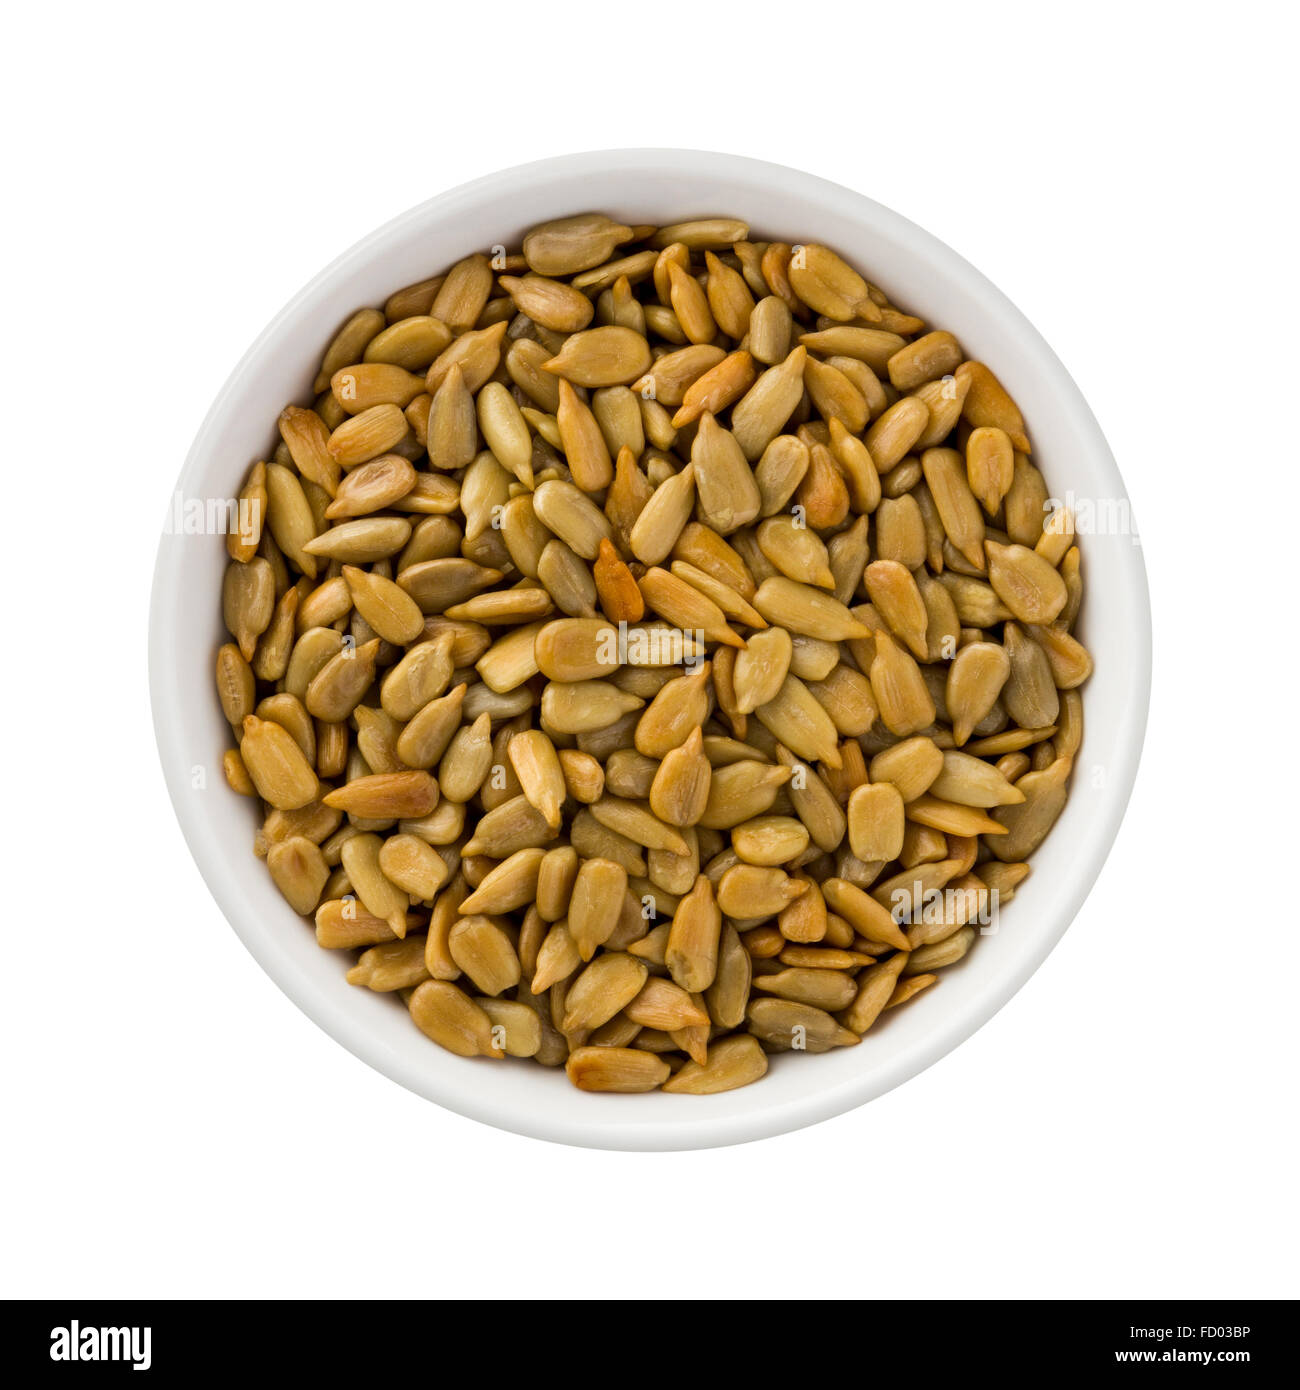 Roasted Sunflower Seeds in a ceramic bowl. The image is a cut out, isolated on a white background. Stock Photo